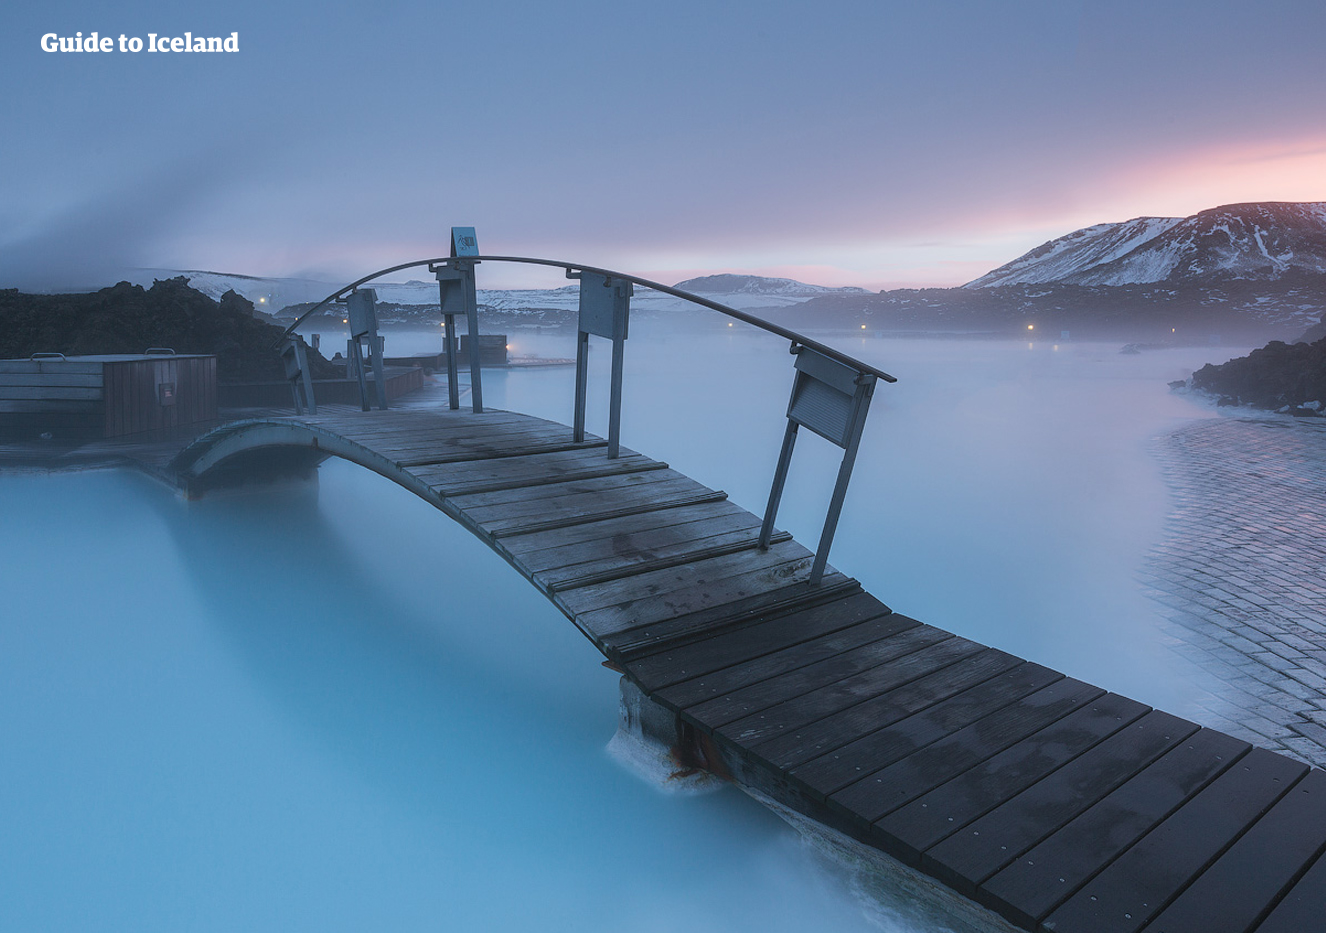 Explore the great Reykjanes Peninsula where you'll find the Blue Lagoon on a winter self-drive tour.